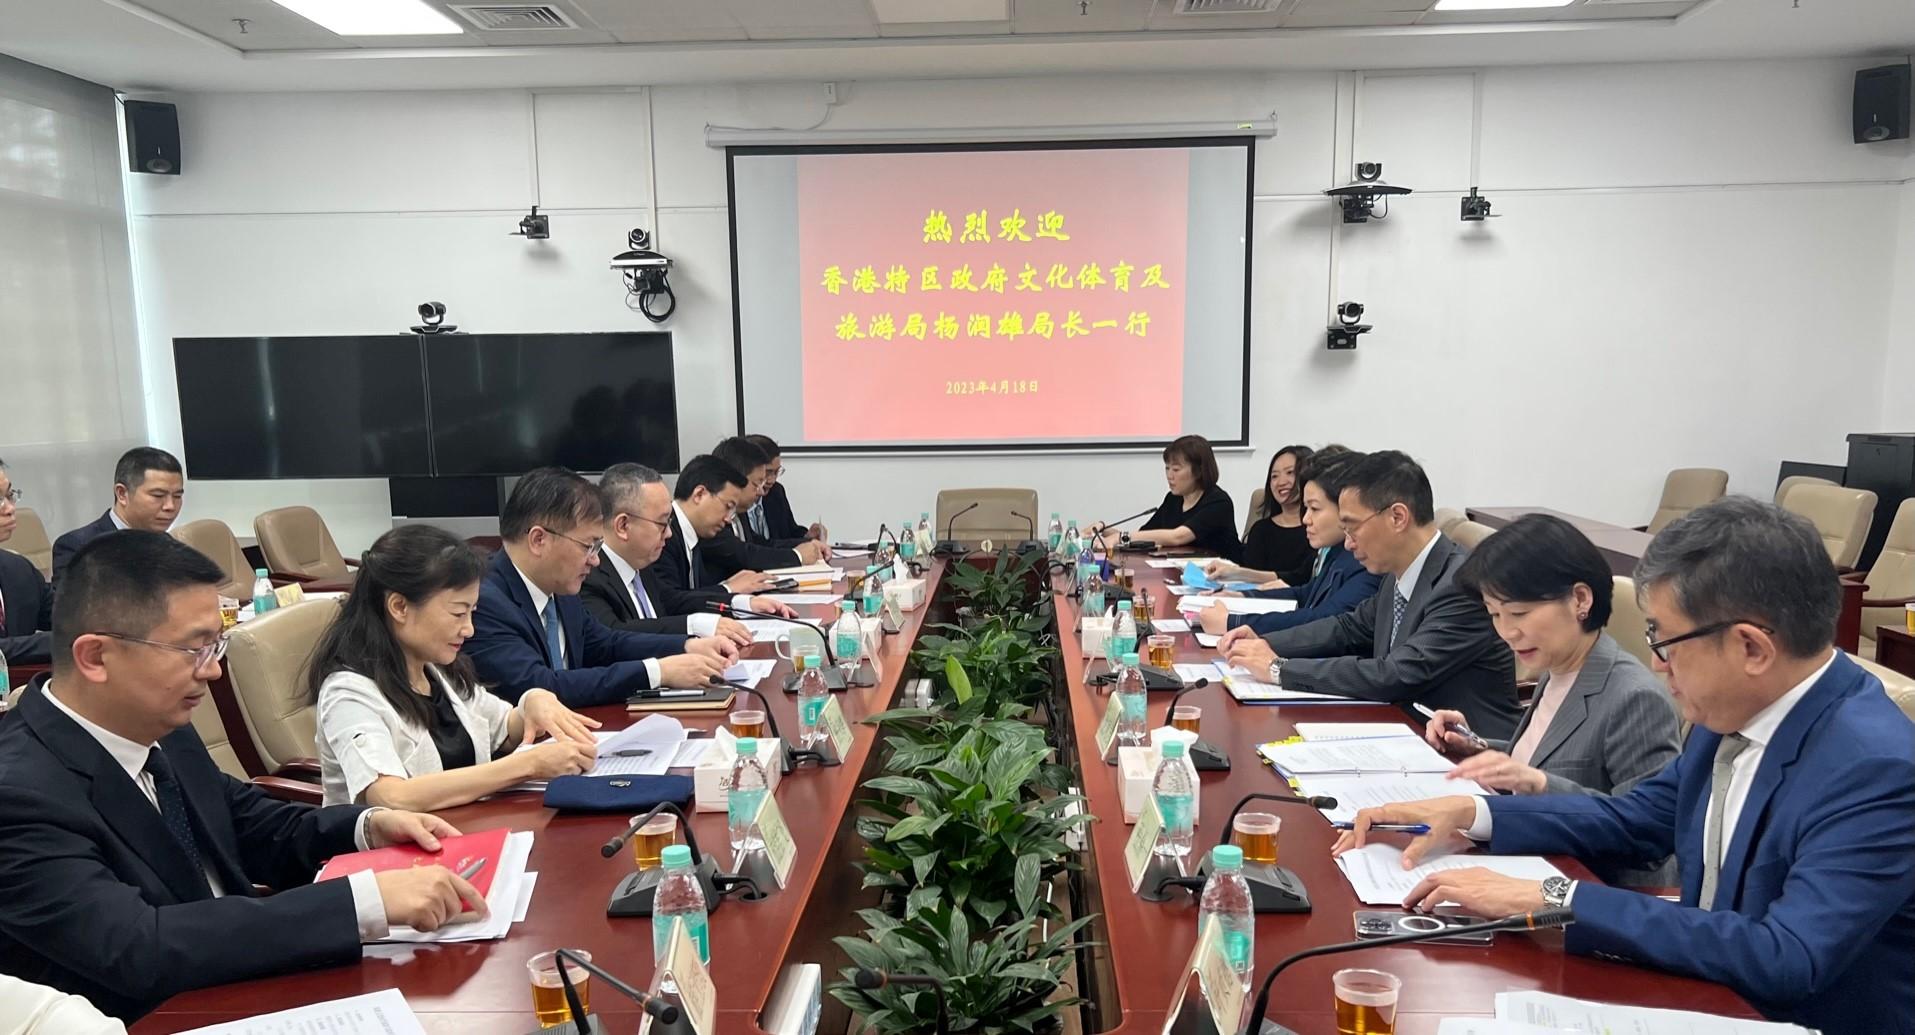 The Secretary for Culture, Sports and Tourism, Mr Kevin Yeung (third right), today (April 18) met with the Director General of the Shenzhen Municipal Bureau of Culture, Sports, Tourism, Radio and Television, Mr Zeng Xianglai (third left), in Shenzhen. The Commissioner for Tourism, Ms Vivian Sum (second right), and the Deputy Secretary for Culture, Sports and Tourism, Mrs Vicki Kwok (fourth right), also joined the meeting.